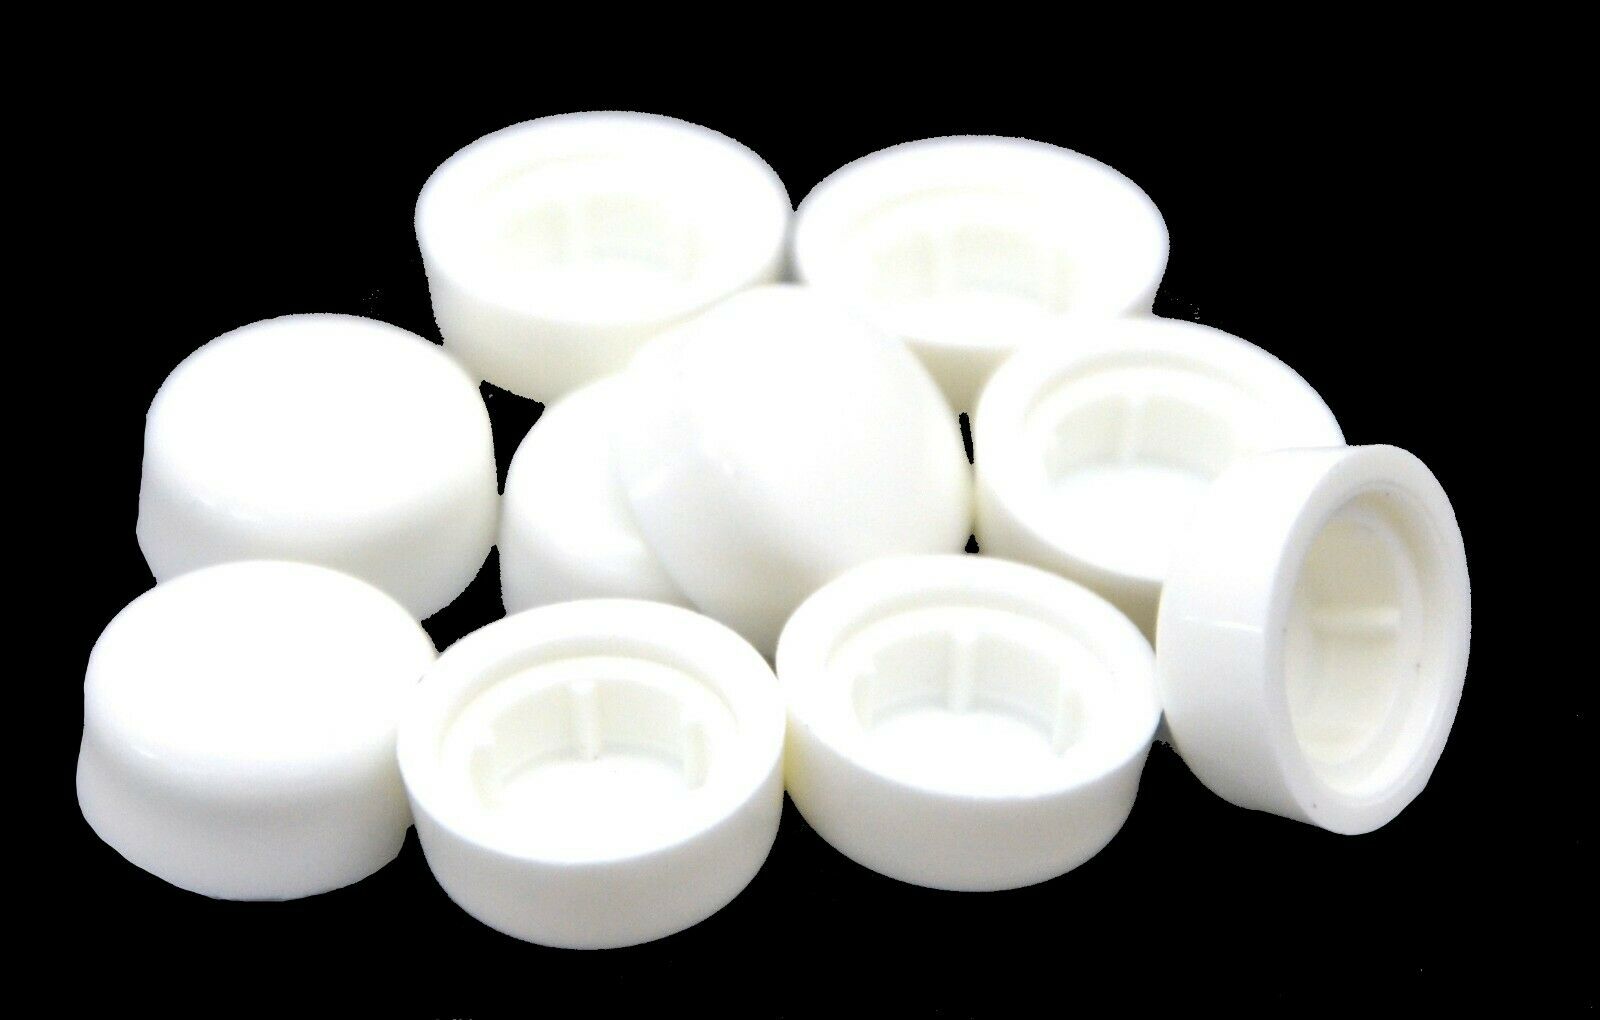 Hex Head Bolt Or Nut Cover 3/8" White Abs Plastic Dome Shaped Push On Set Of 10